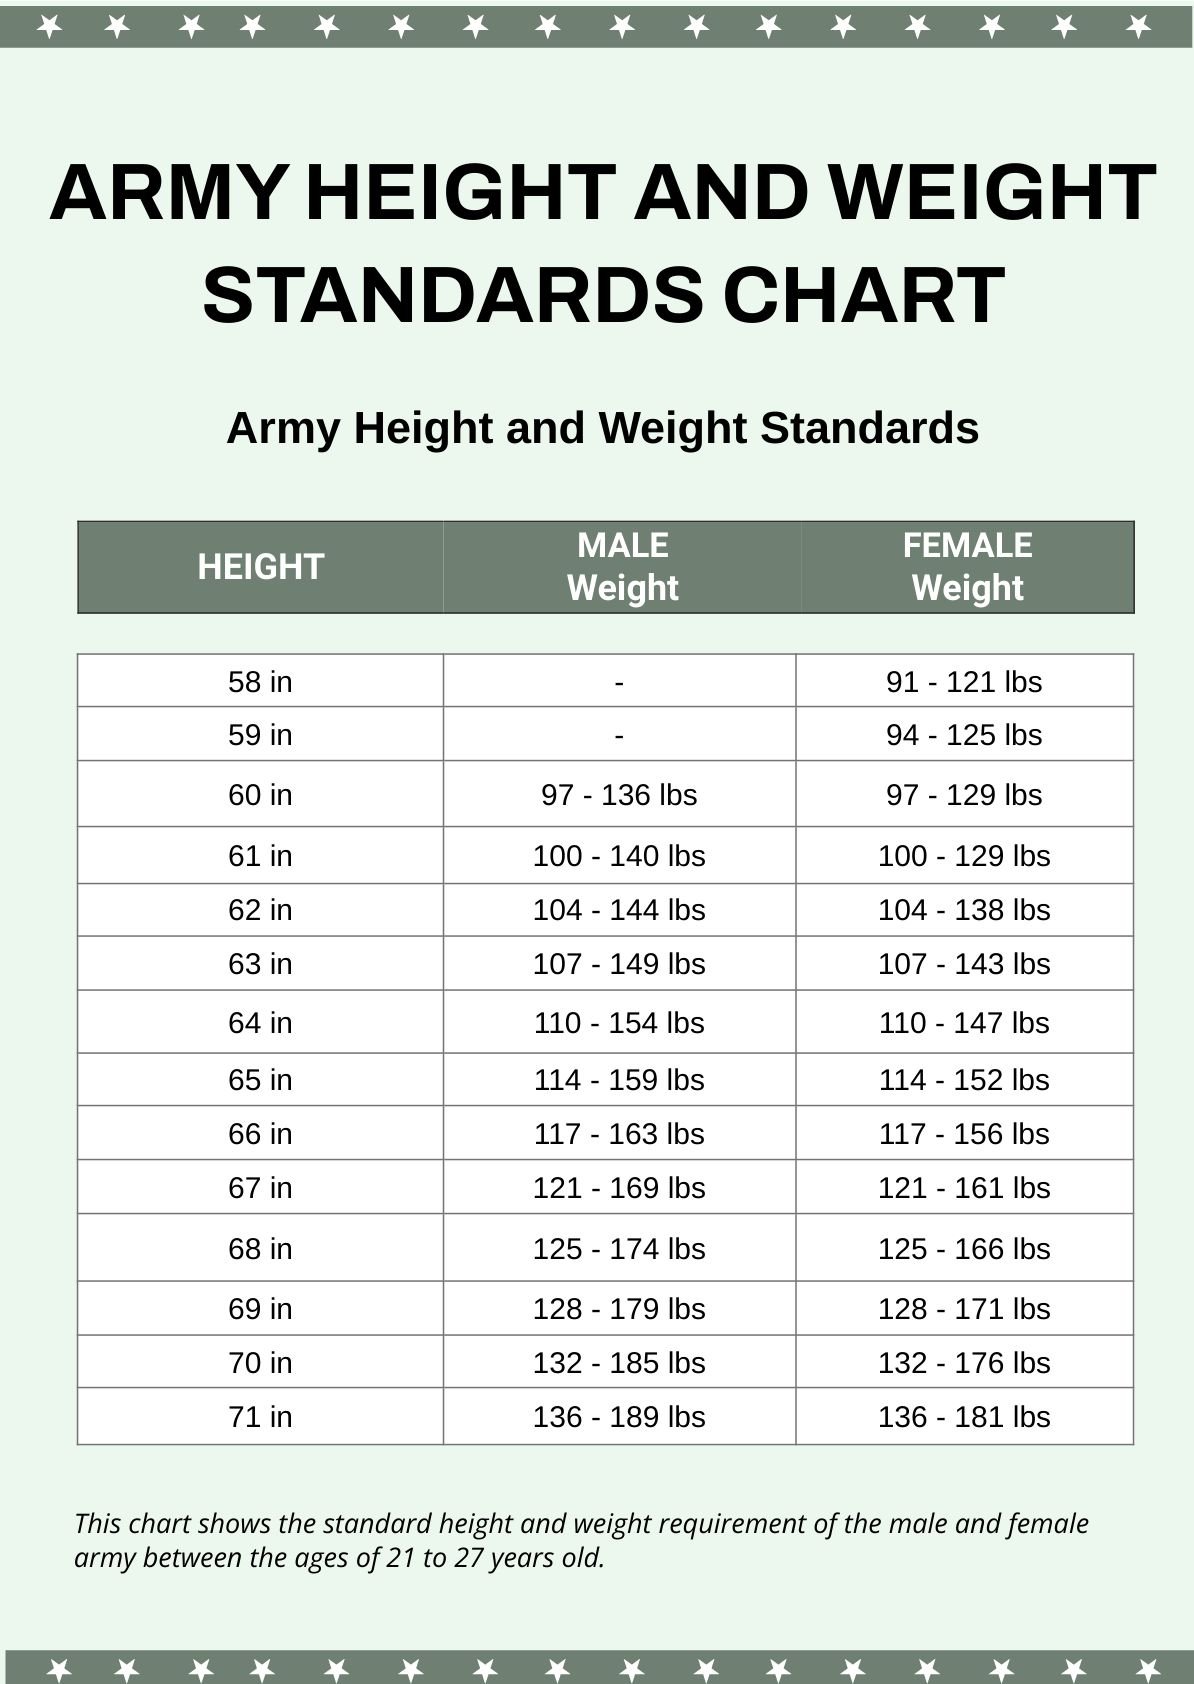 Army Height And Weight Standards Chart in PDF, Illustrator - Download